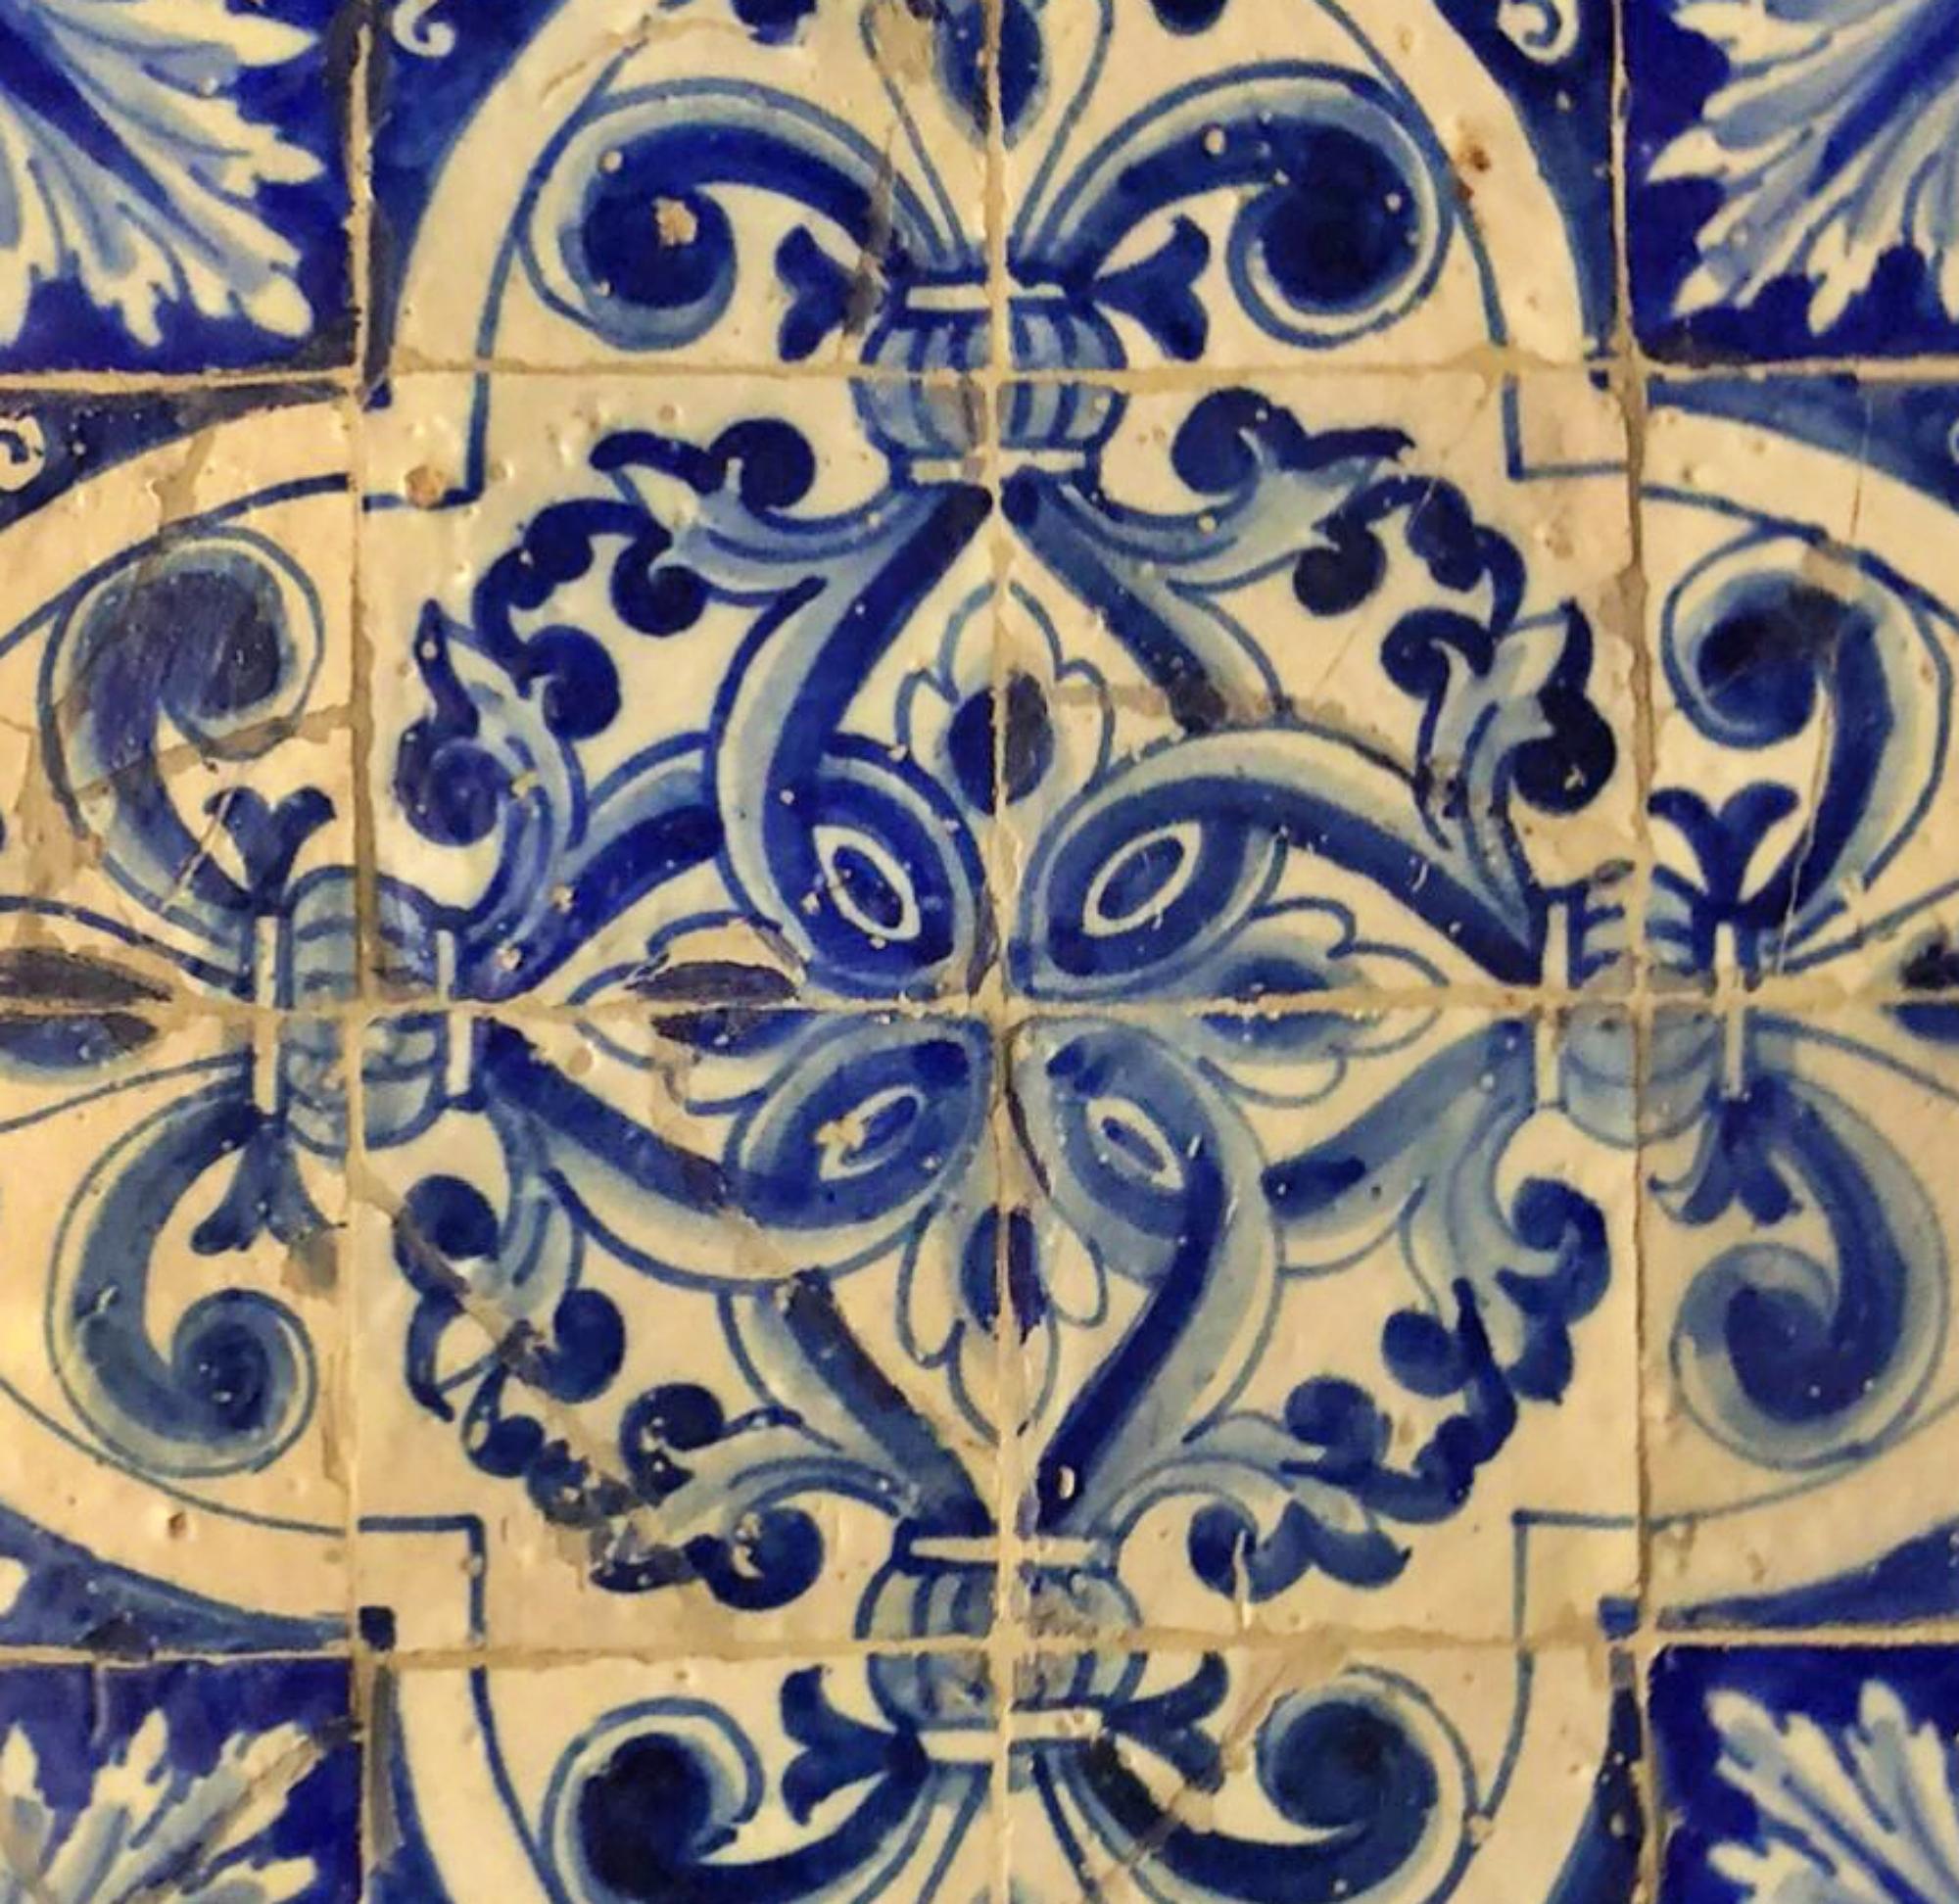 Hand-Crafted 17th Century Portuguese Tile Panel For Sale